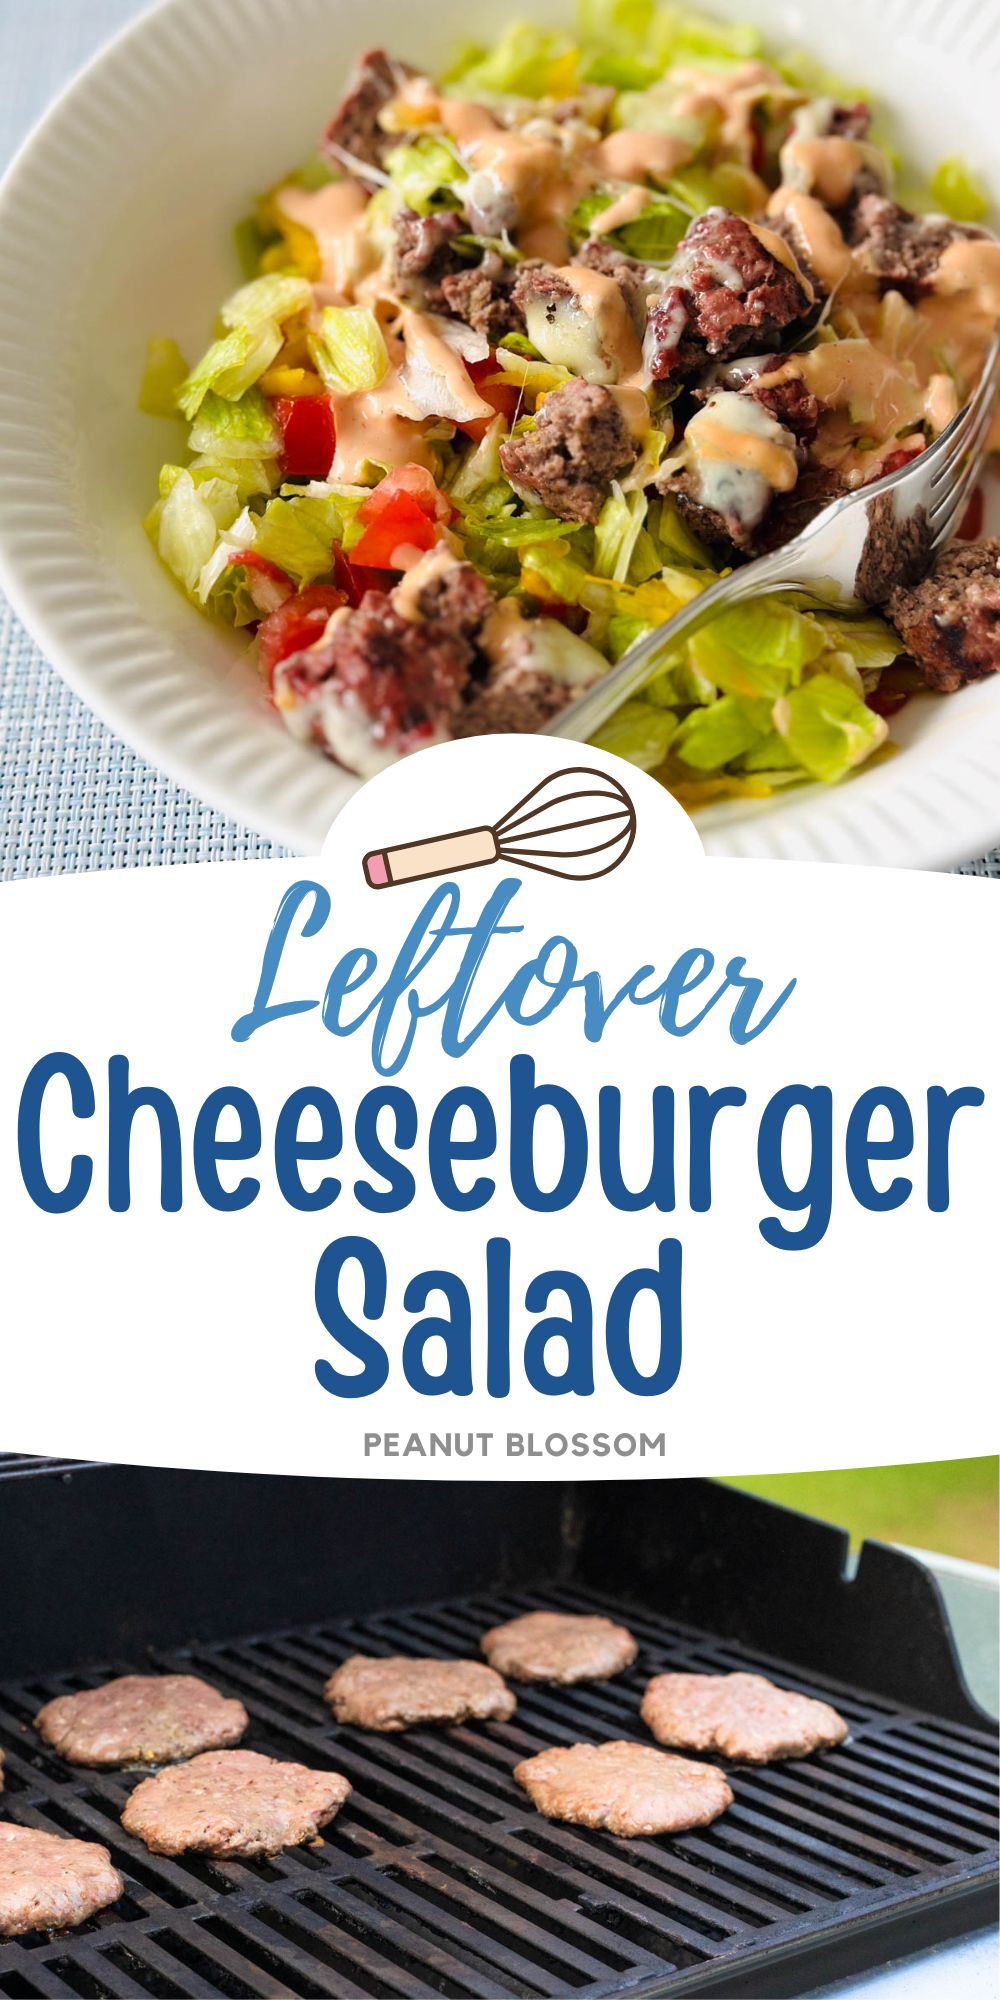 Photo collage: A bowl of cheeseburger salad on top, the burgers grilling outside below.